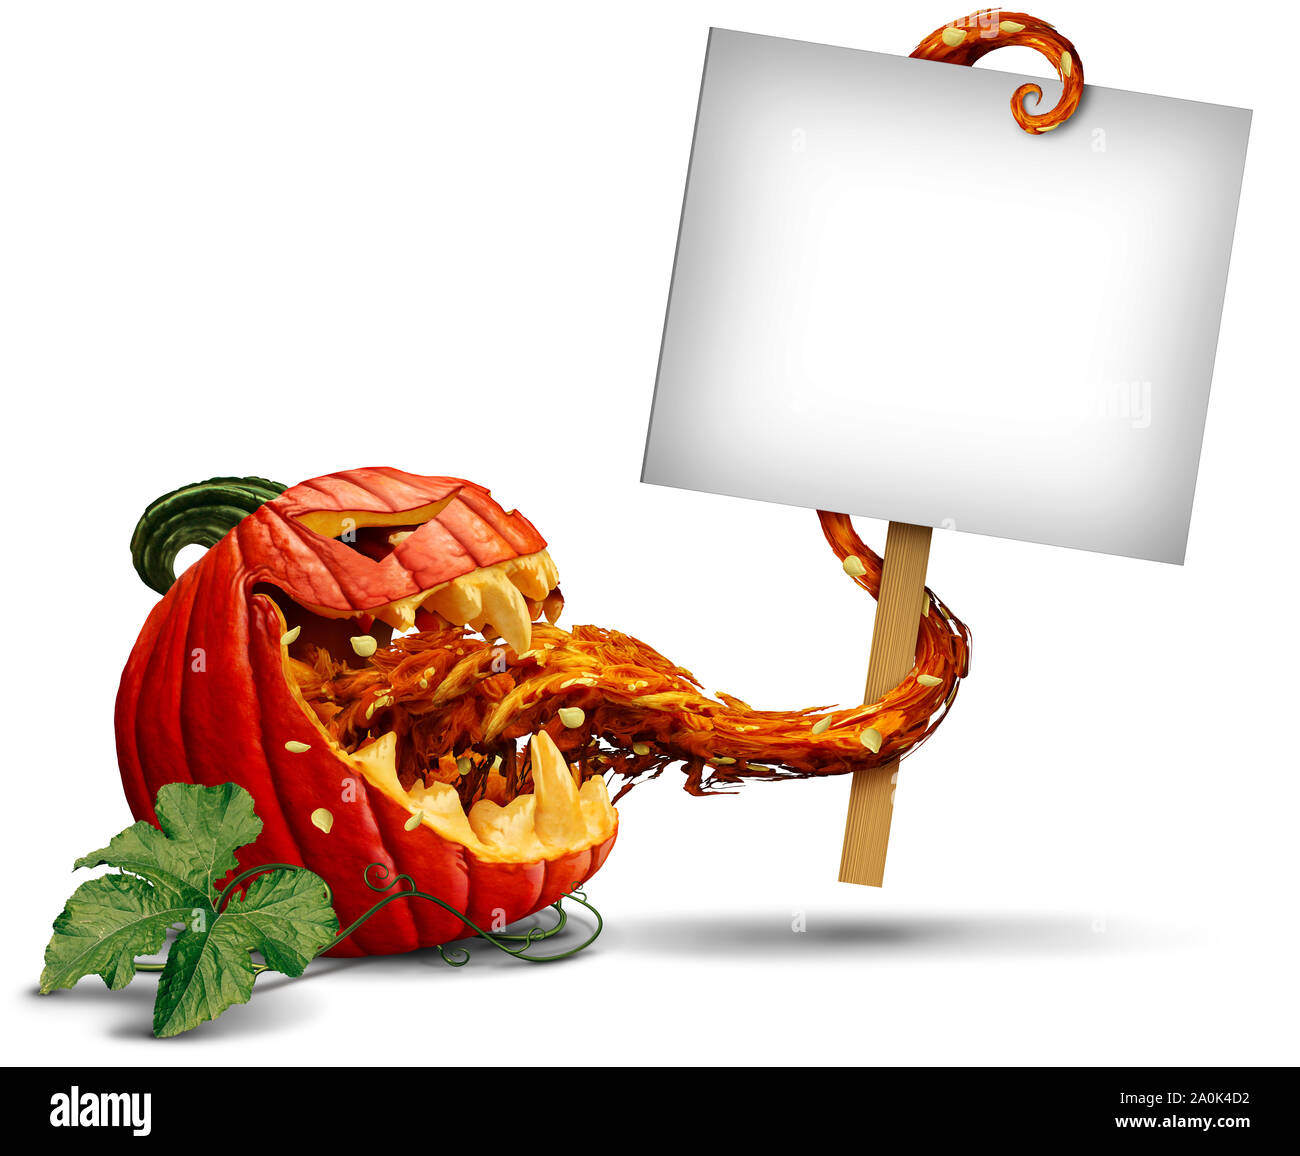 Jack o lantern evil pumpkin zombie holding a blank sign card with a tongue as a creepy halloween or scary symbol on a white background. Stock Photo